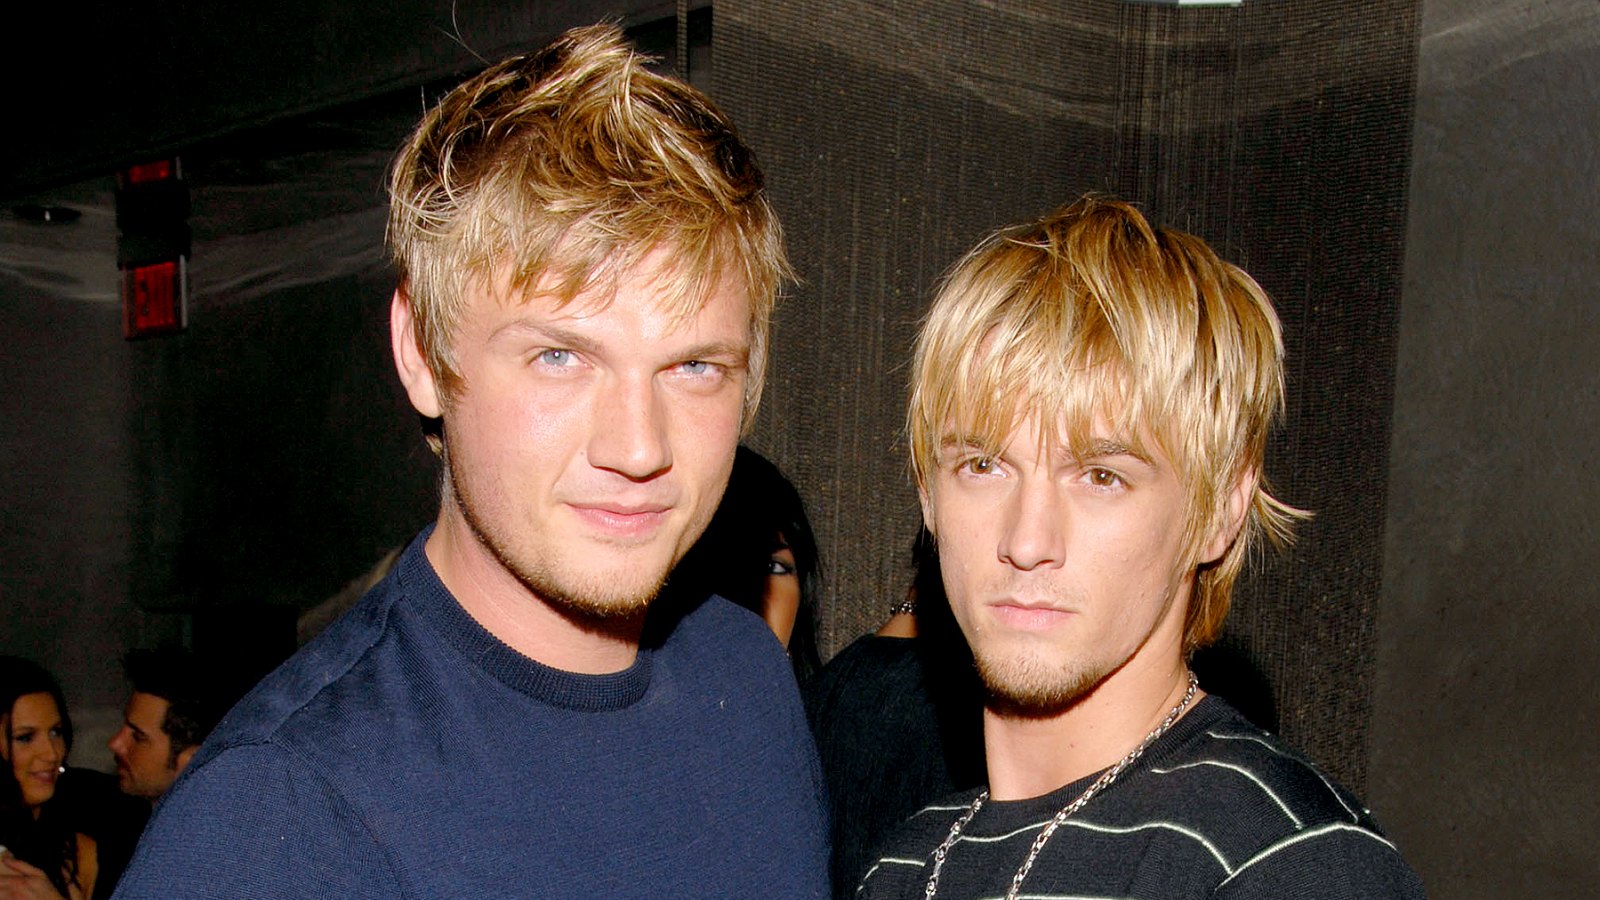 Nick Carter and Aaron Carter during Howie Dorough's Birthday Party at LAX in Hollywood, California, in 2006.